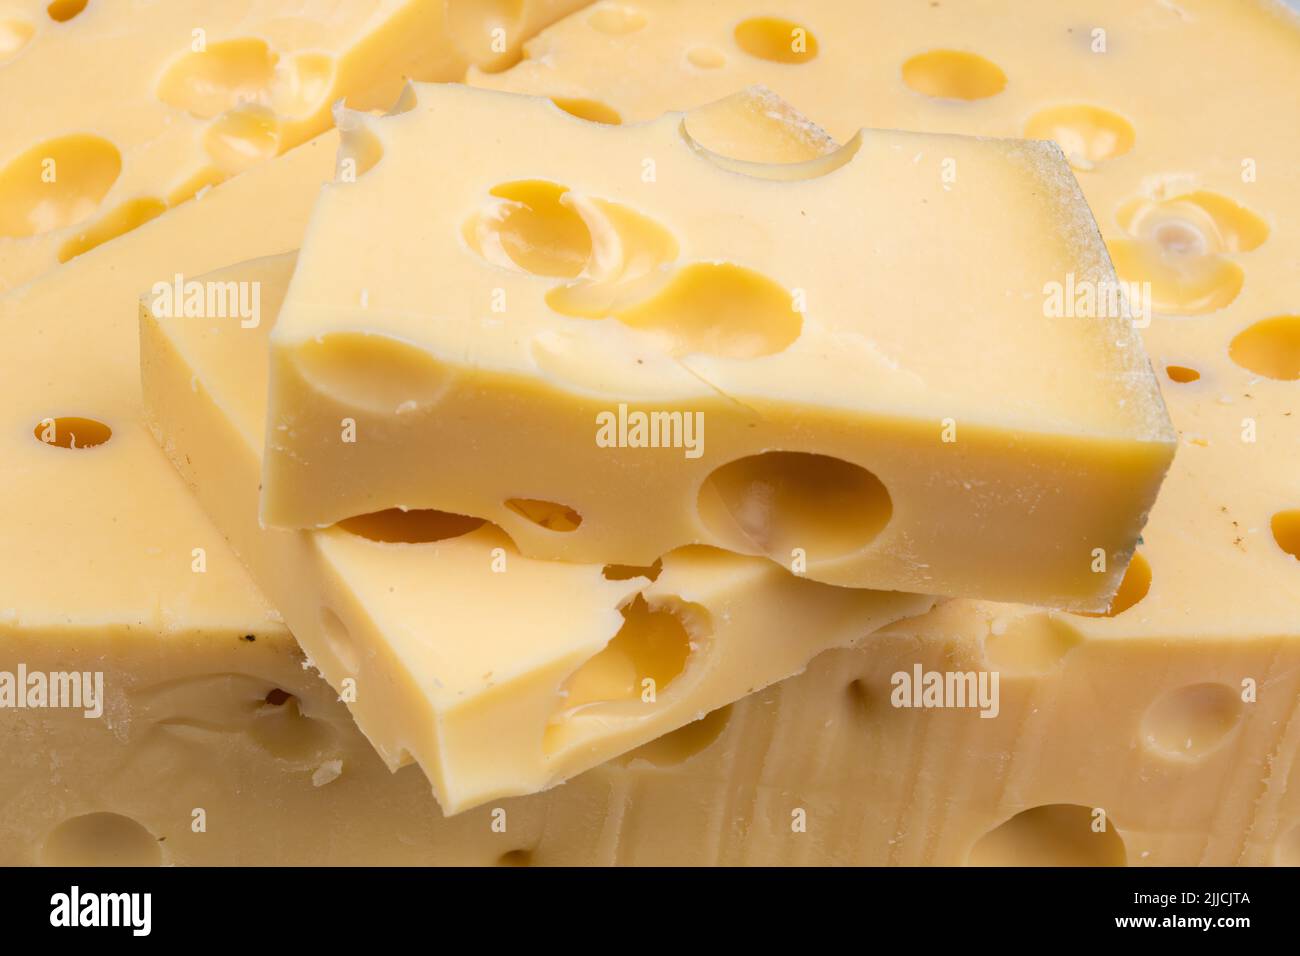 Fresh emmental cheese for cooking or eating Stock Photo